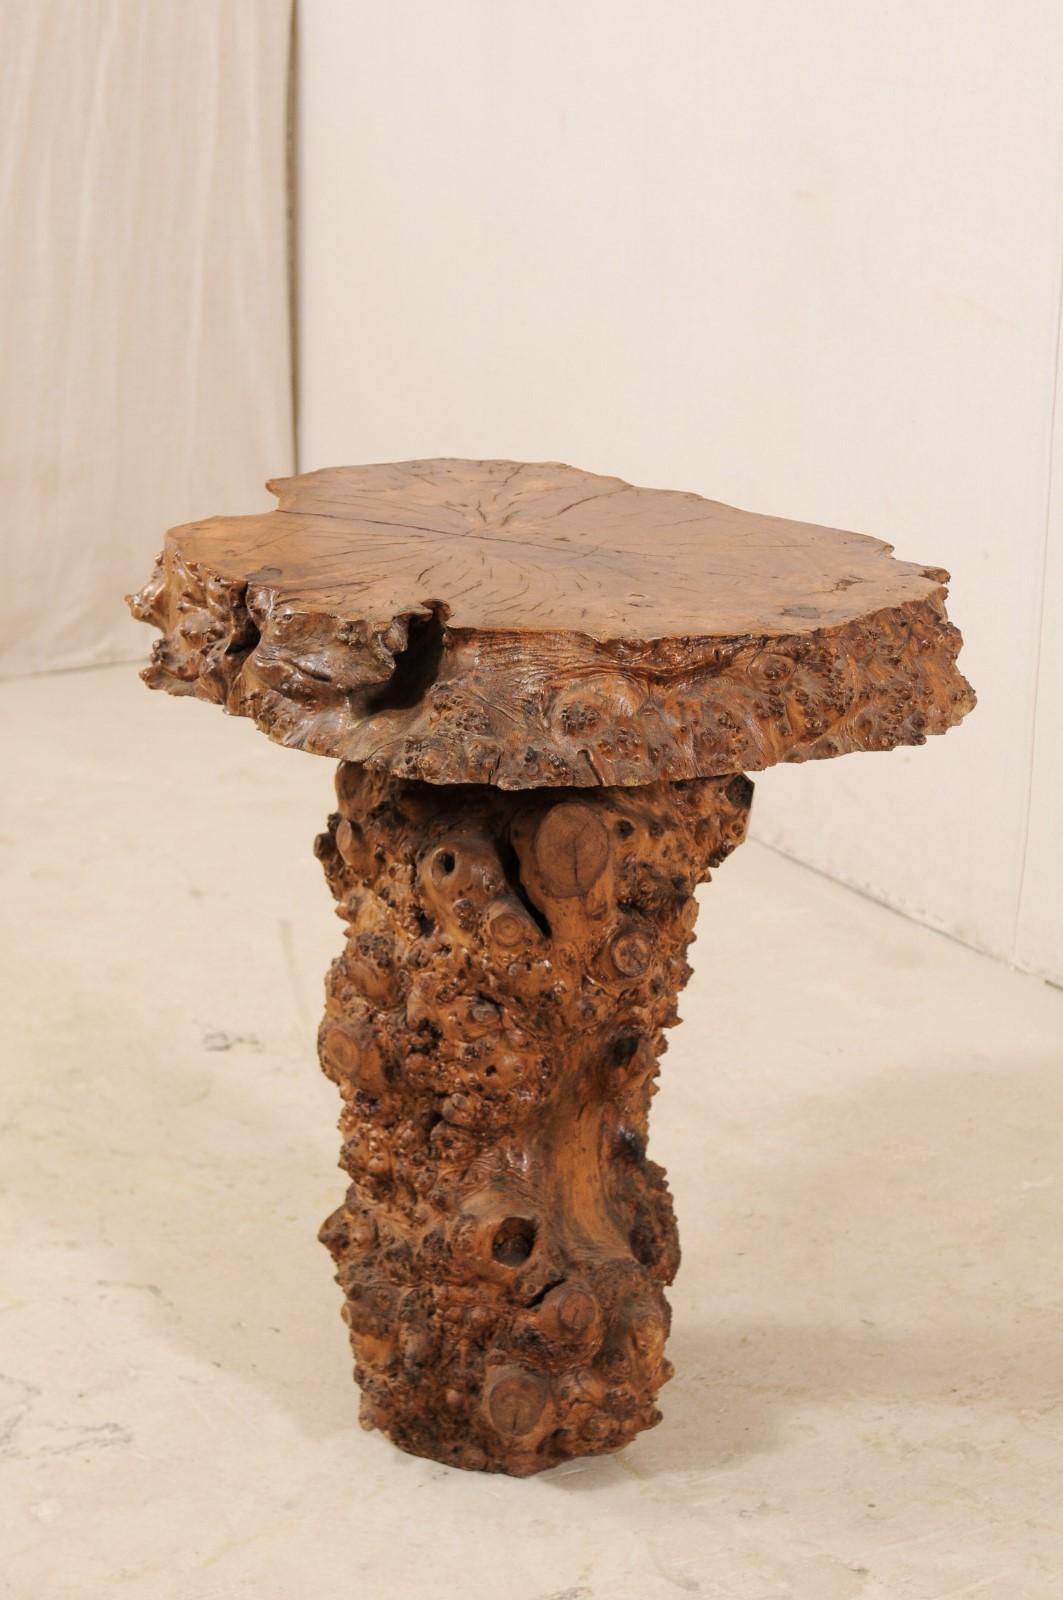 20th Century European Live-Edge Burl Side Table with Slab Top & Knobby Texture, Early 20th C. For Sale